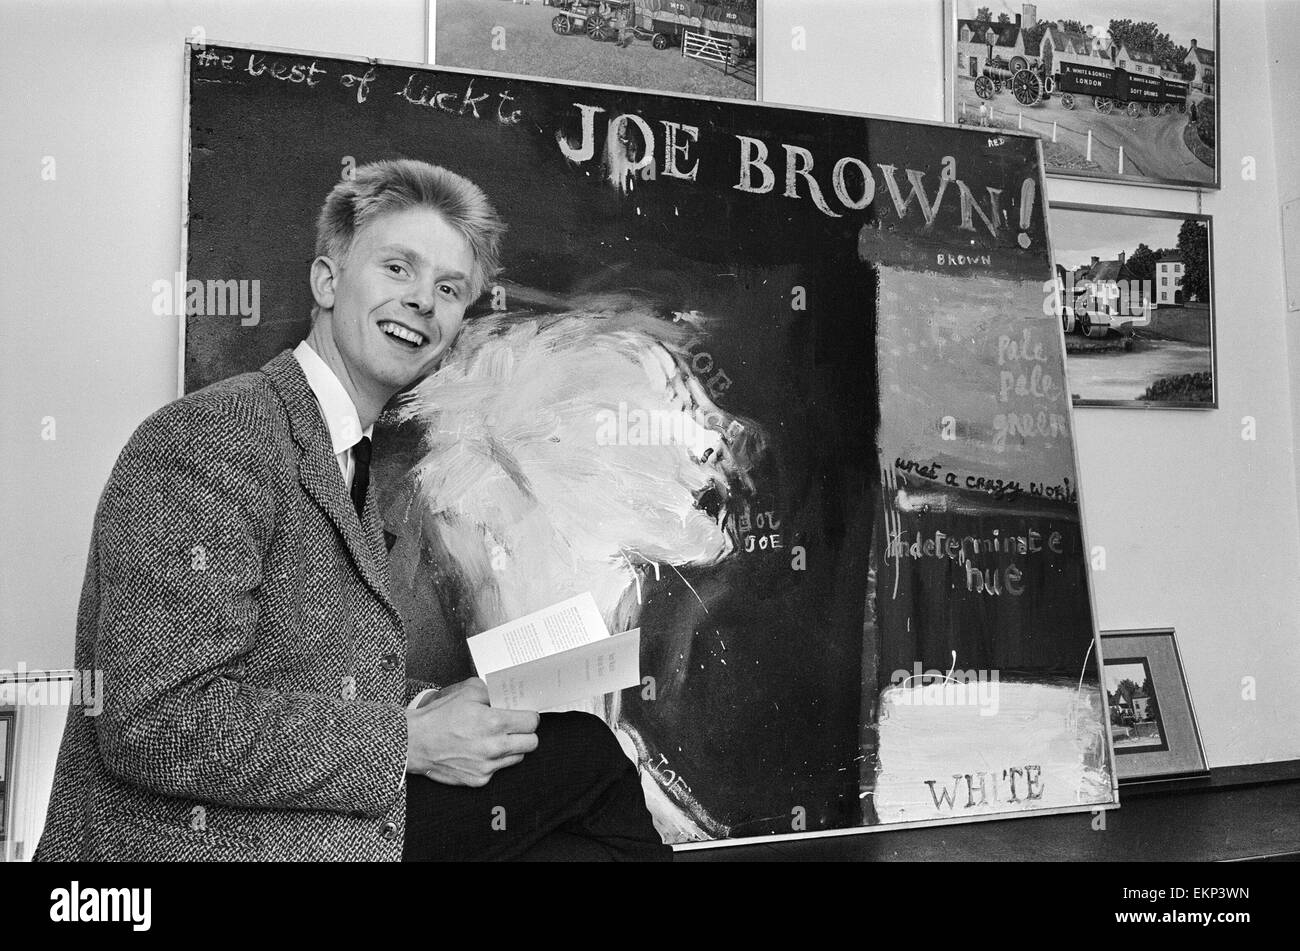 Singer Joe Brown collects a picture of himself from Portal Gallery, Grafton Street, W1. 5th July 1962. Stock Photo